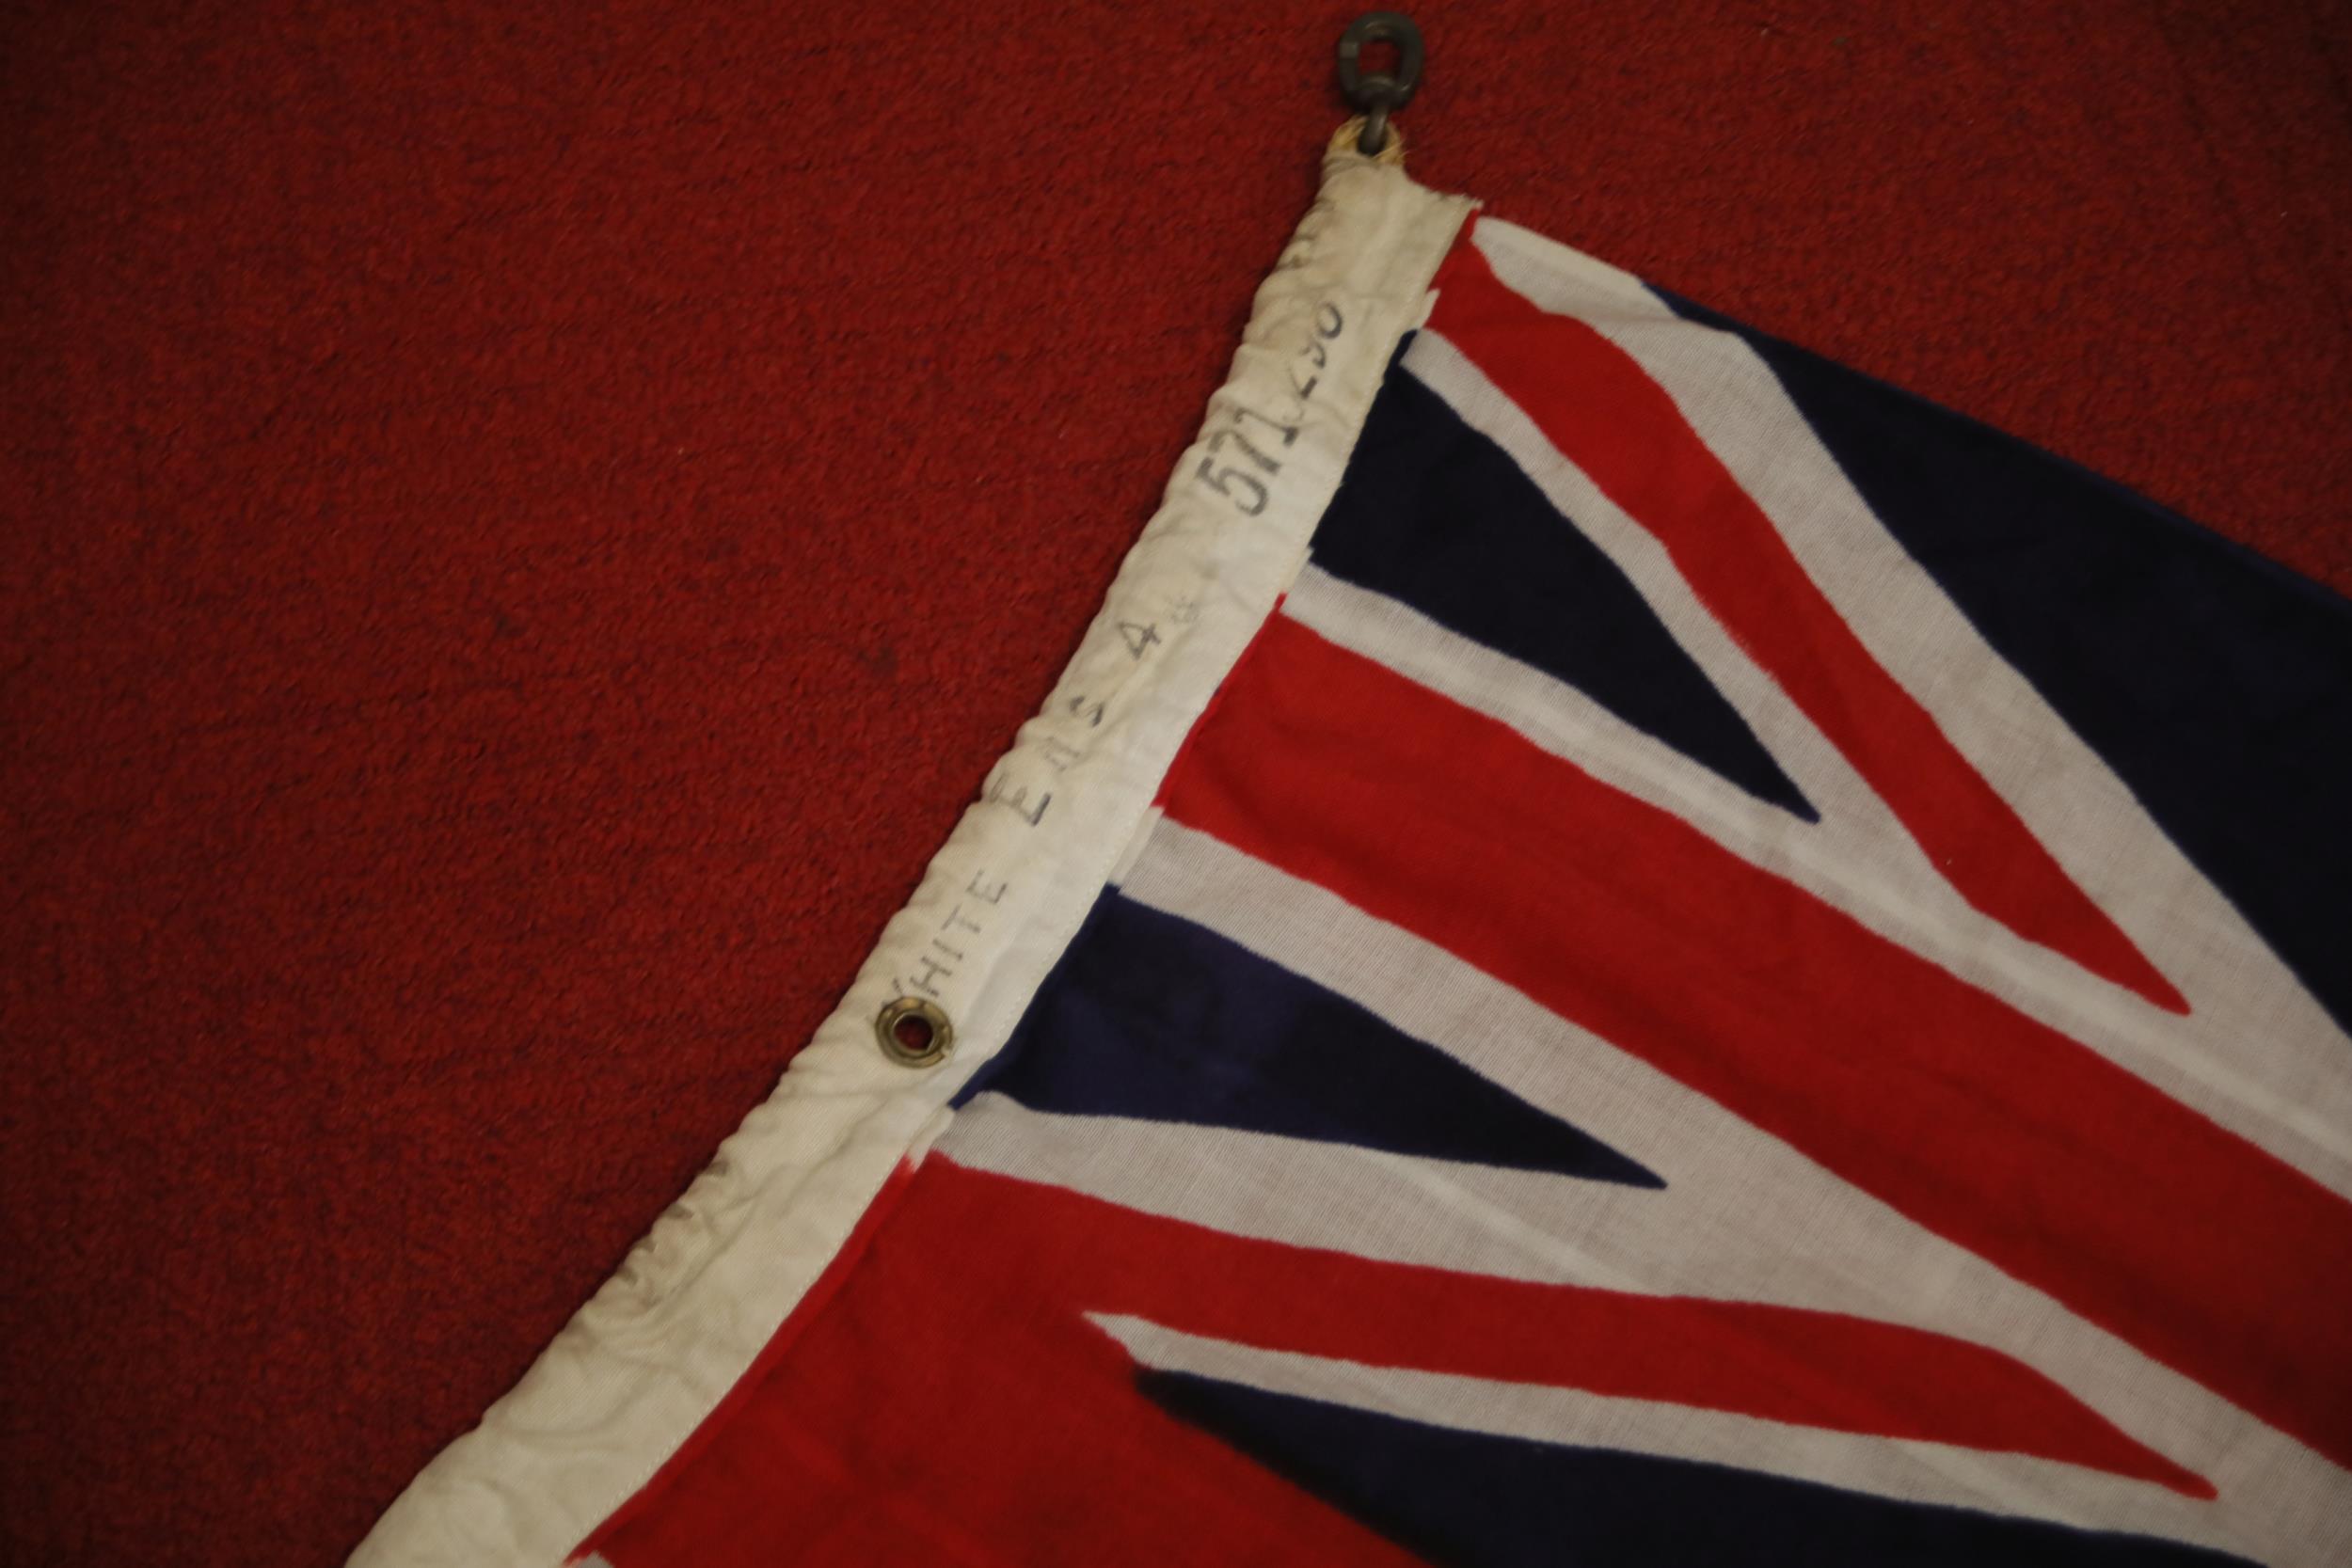 White Ensign Number 4 5715298 British Flag From HMS Ark Royal - Image 8 of 8